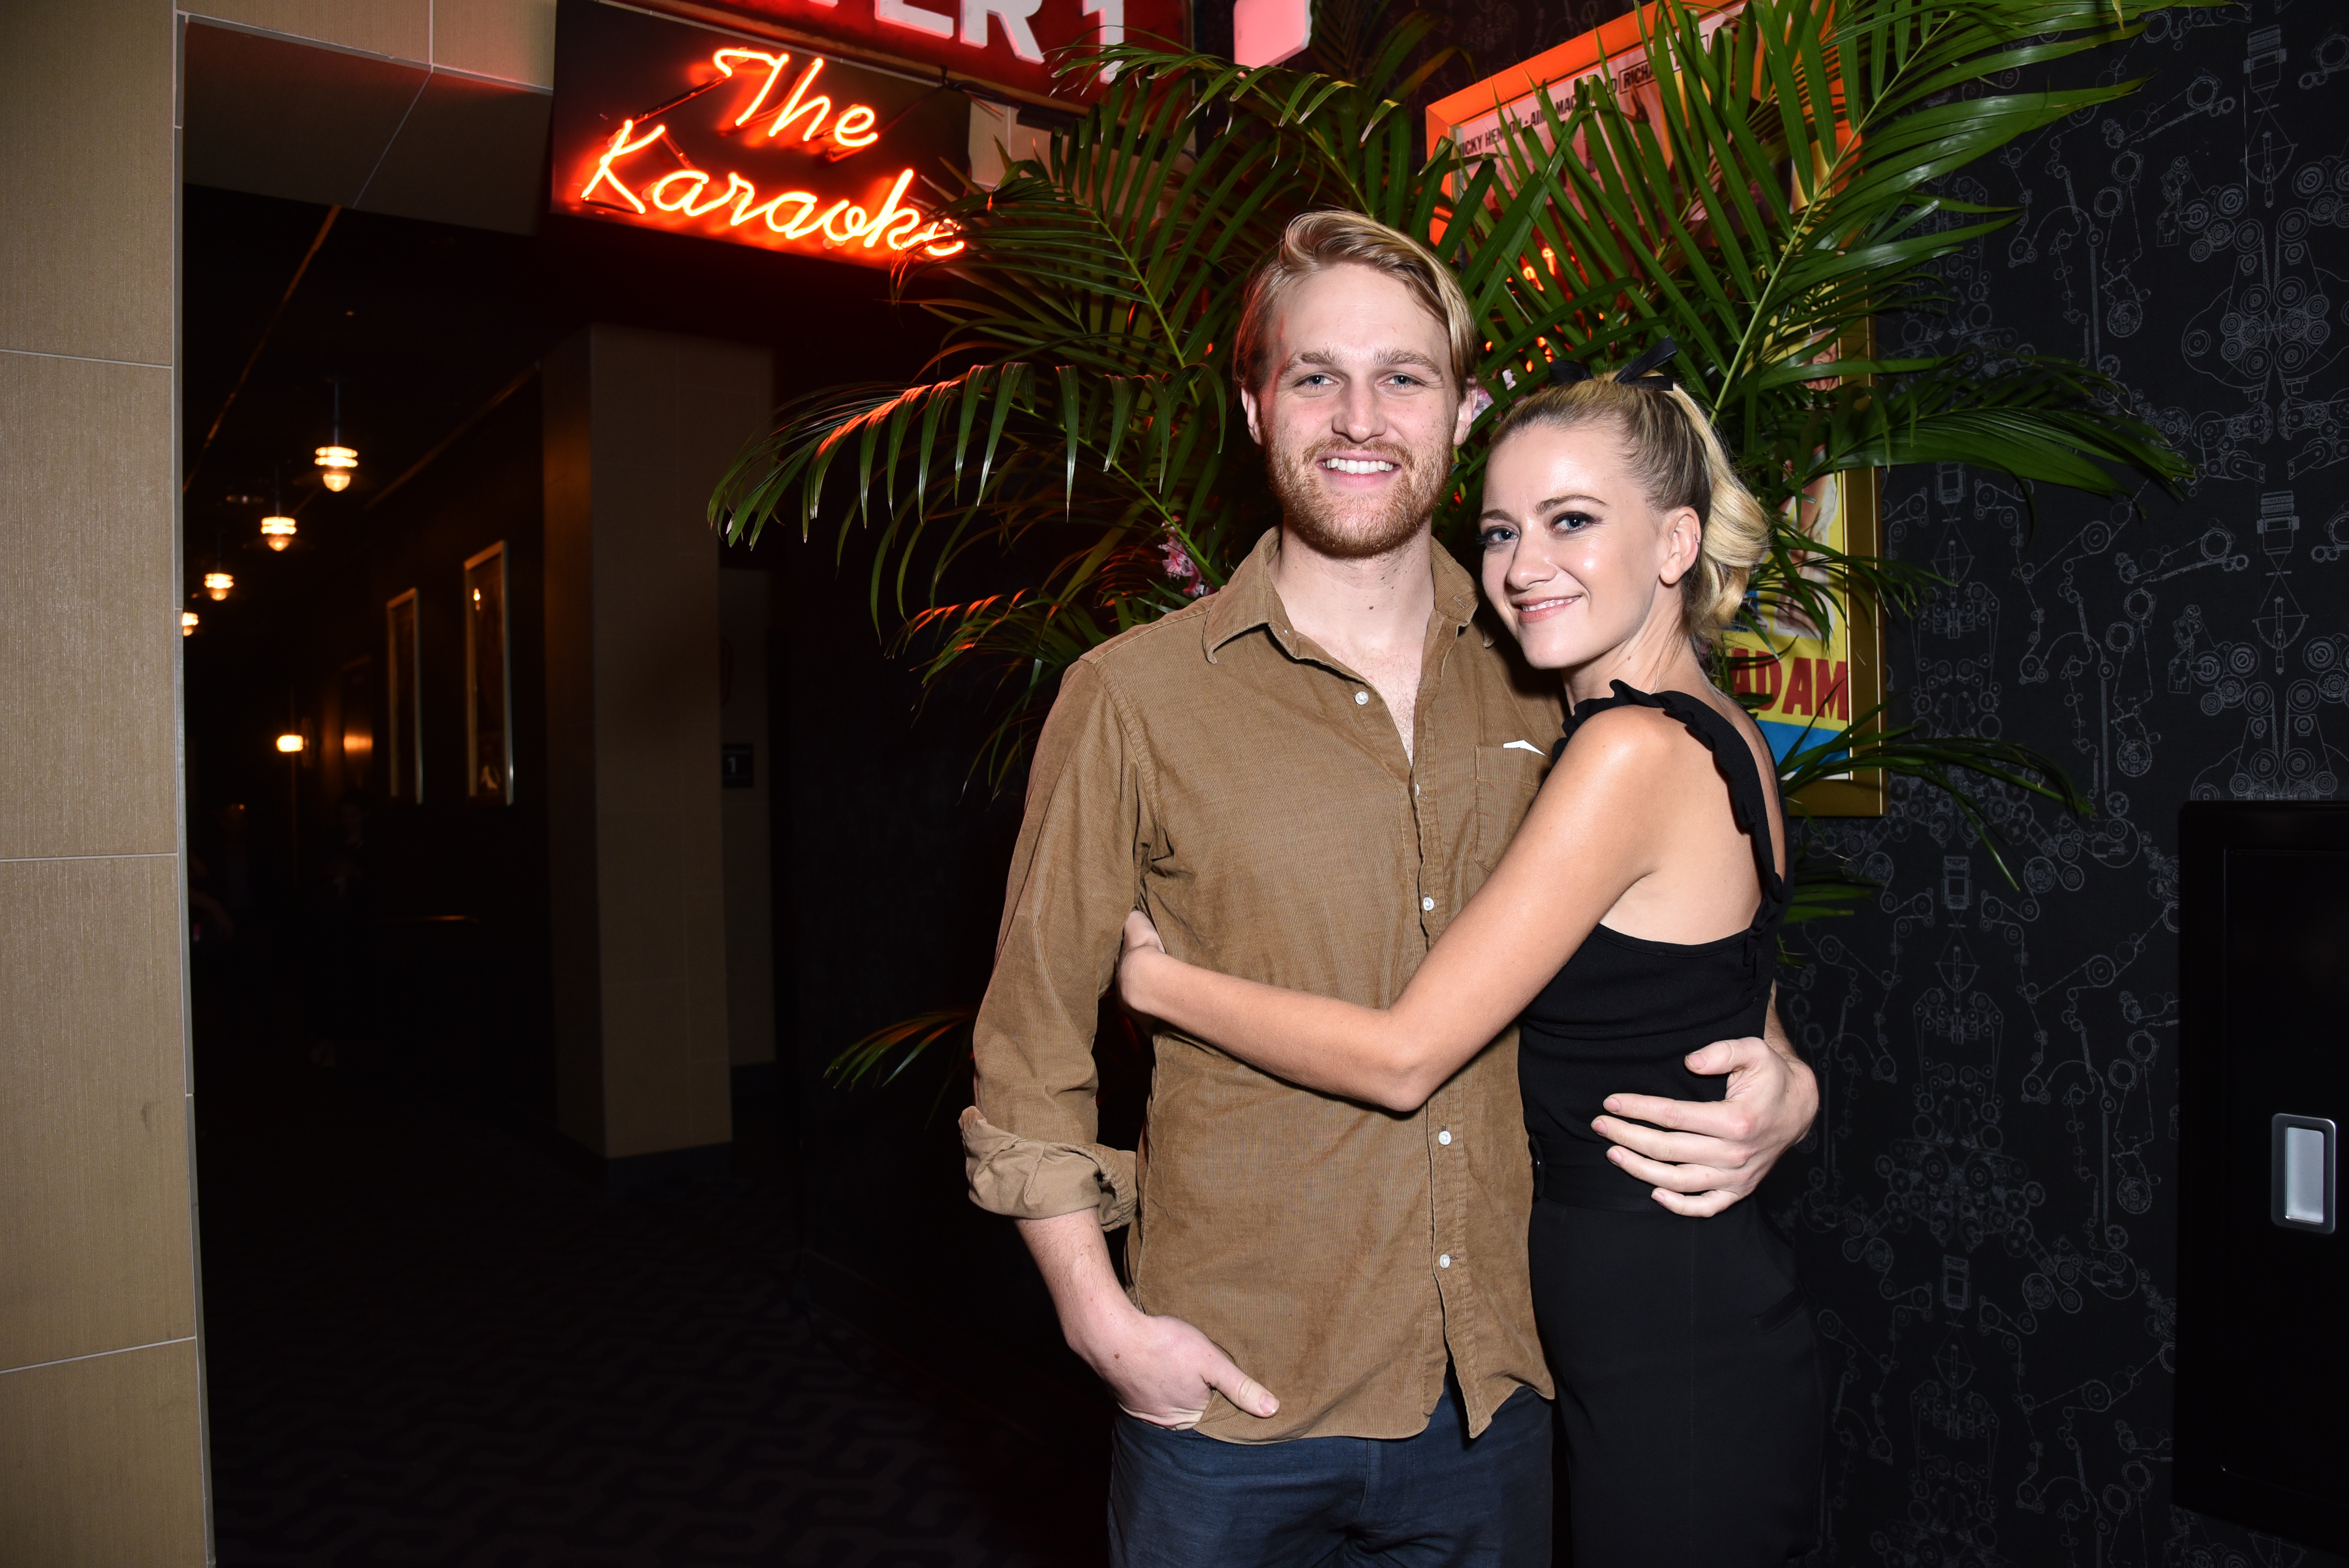 Wyatt Russell and Meredith Hagner attend the after party for the New York premiere of "Ingrid Goes West" in New York City on August 8, 2017 | Source: Getty Images